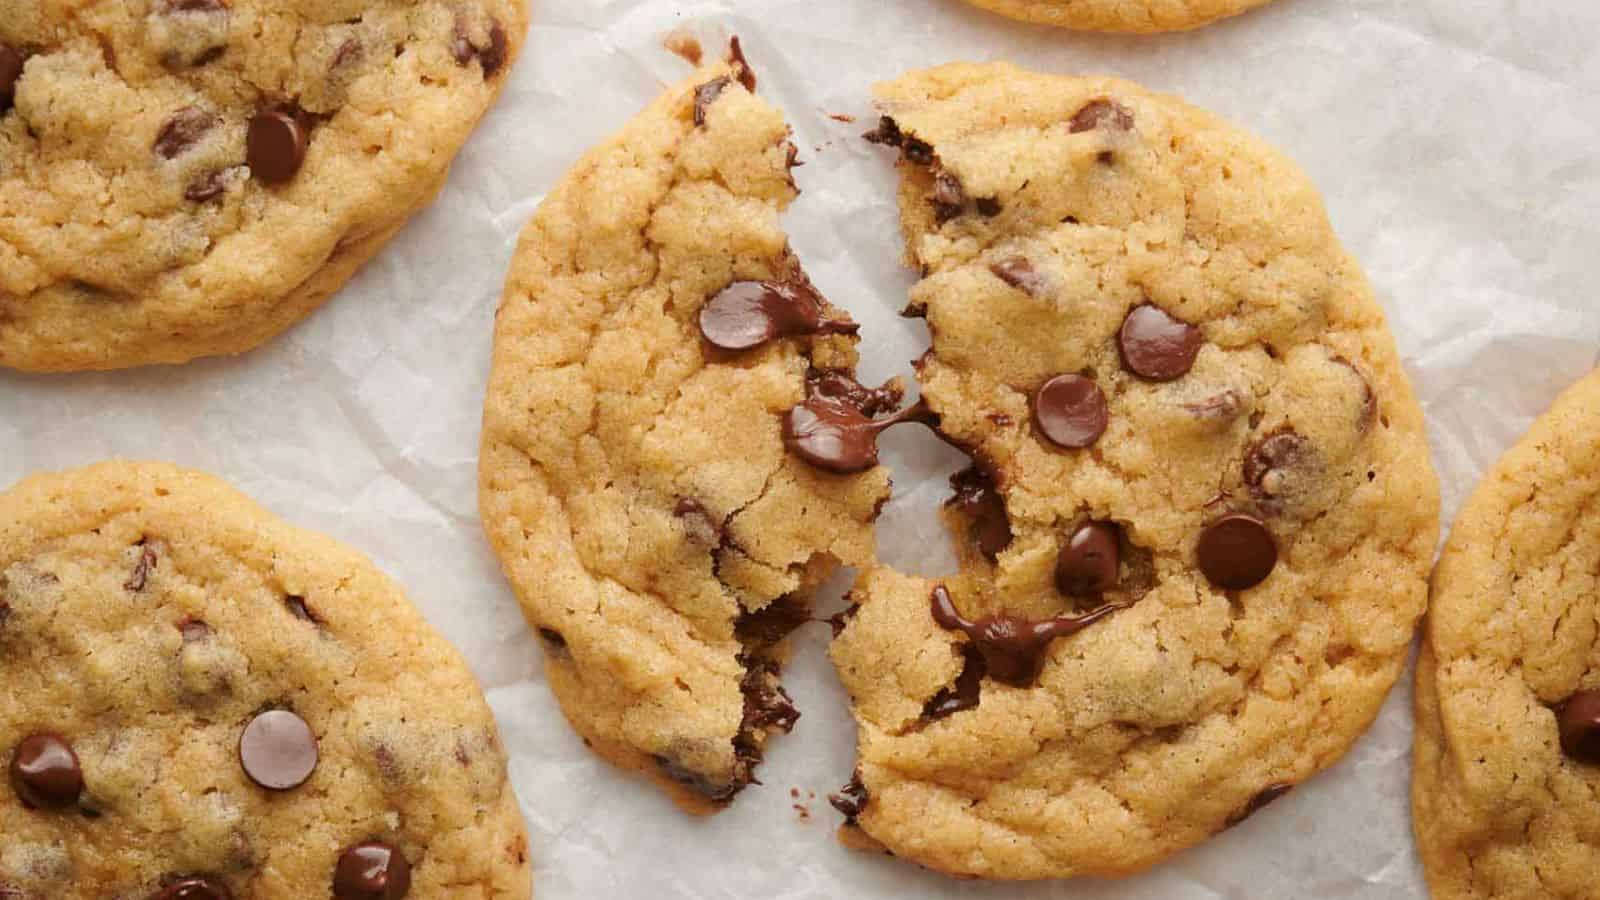 See A Cookie Pic Online? These 13 Recipes Will Make Your Cravings A Reality